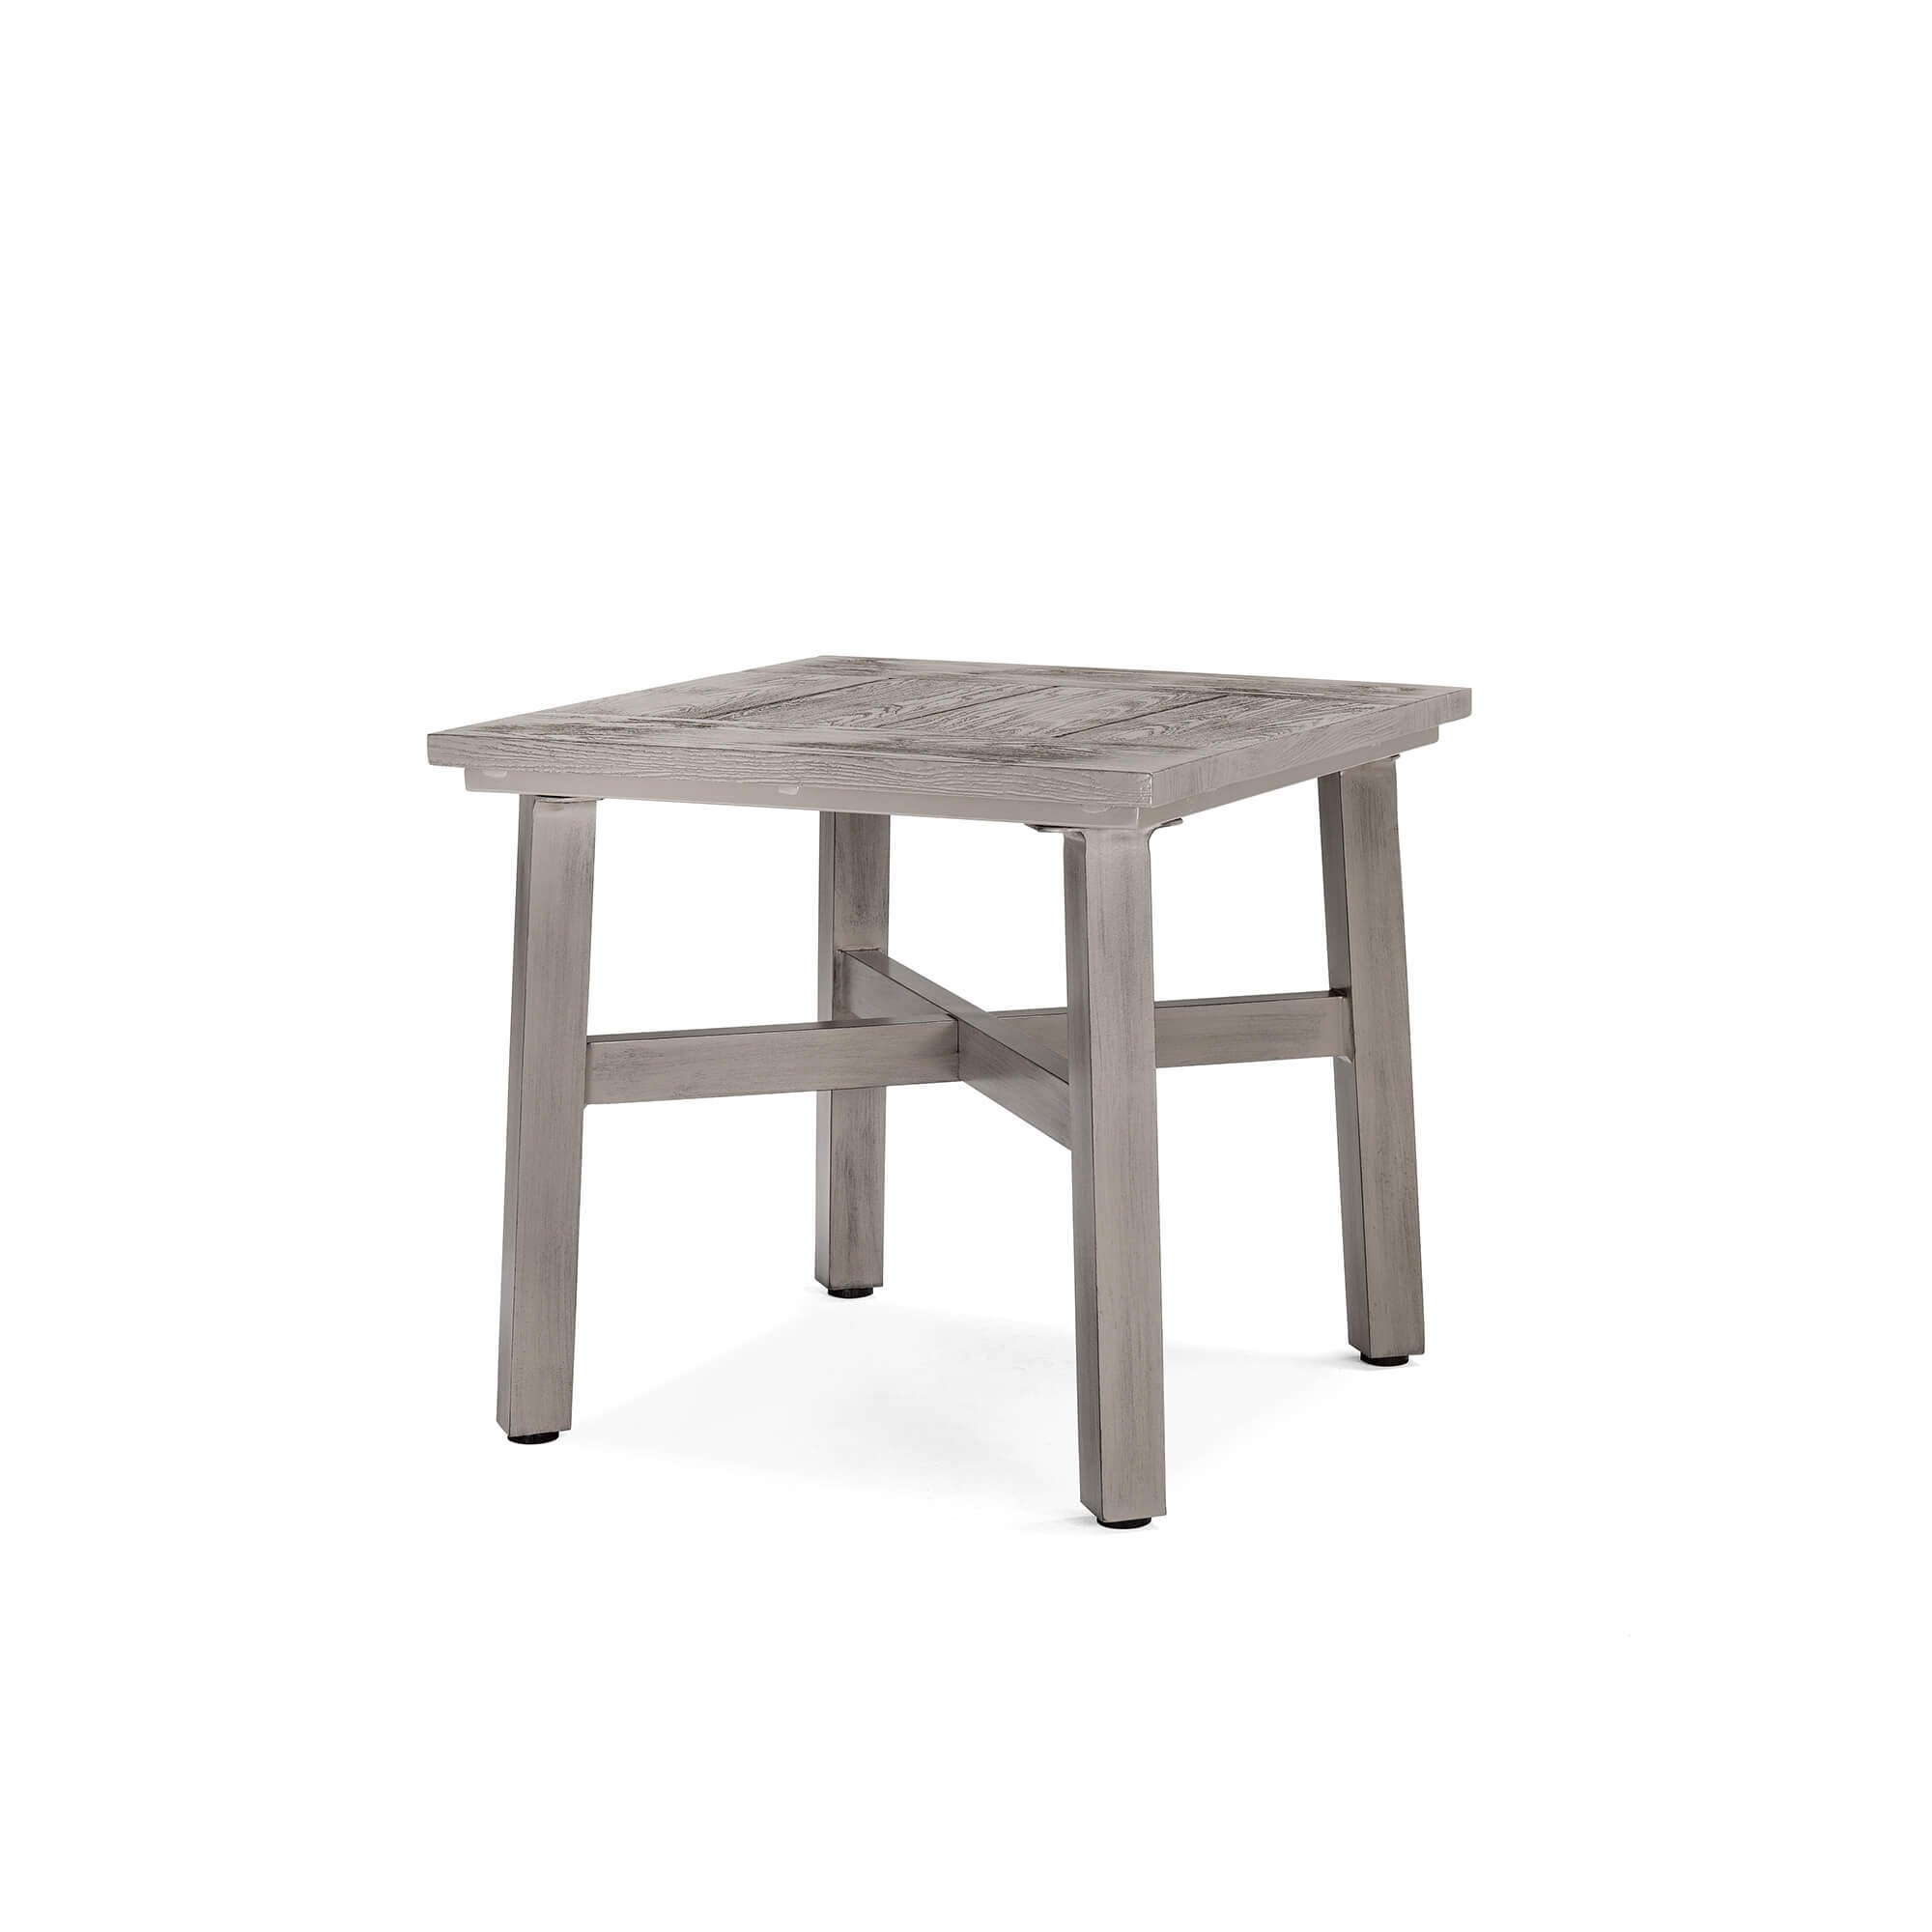 colfax side table blue oak outdoor sidetable grey beer cooler coffee art deco desk porch furniture glass entrance bistro tablecloth small cabinet legs marble with storage gold